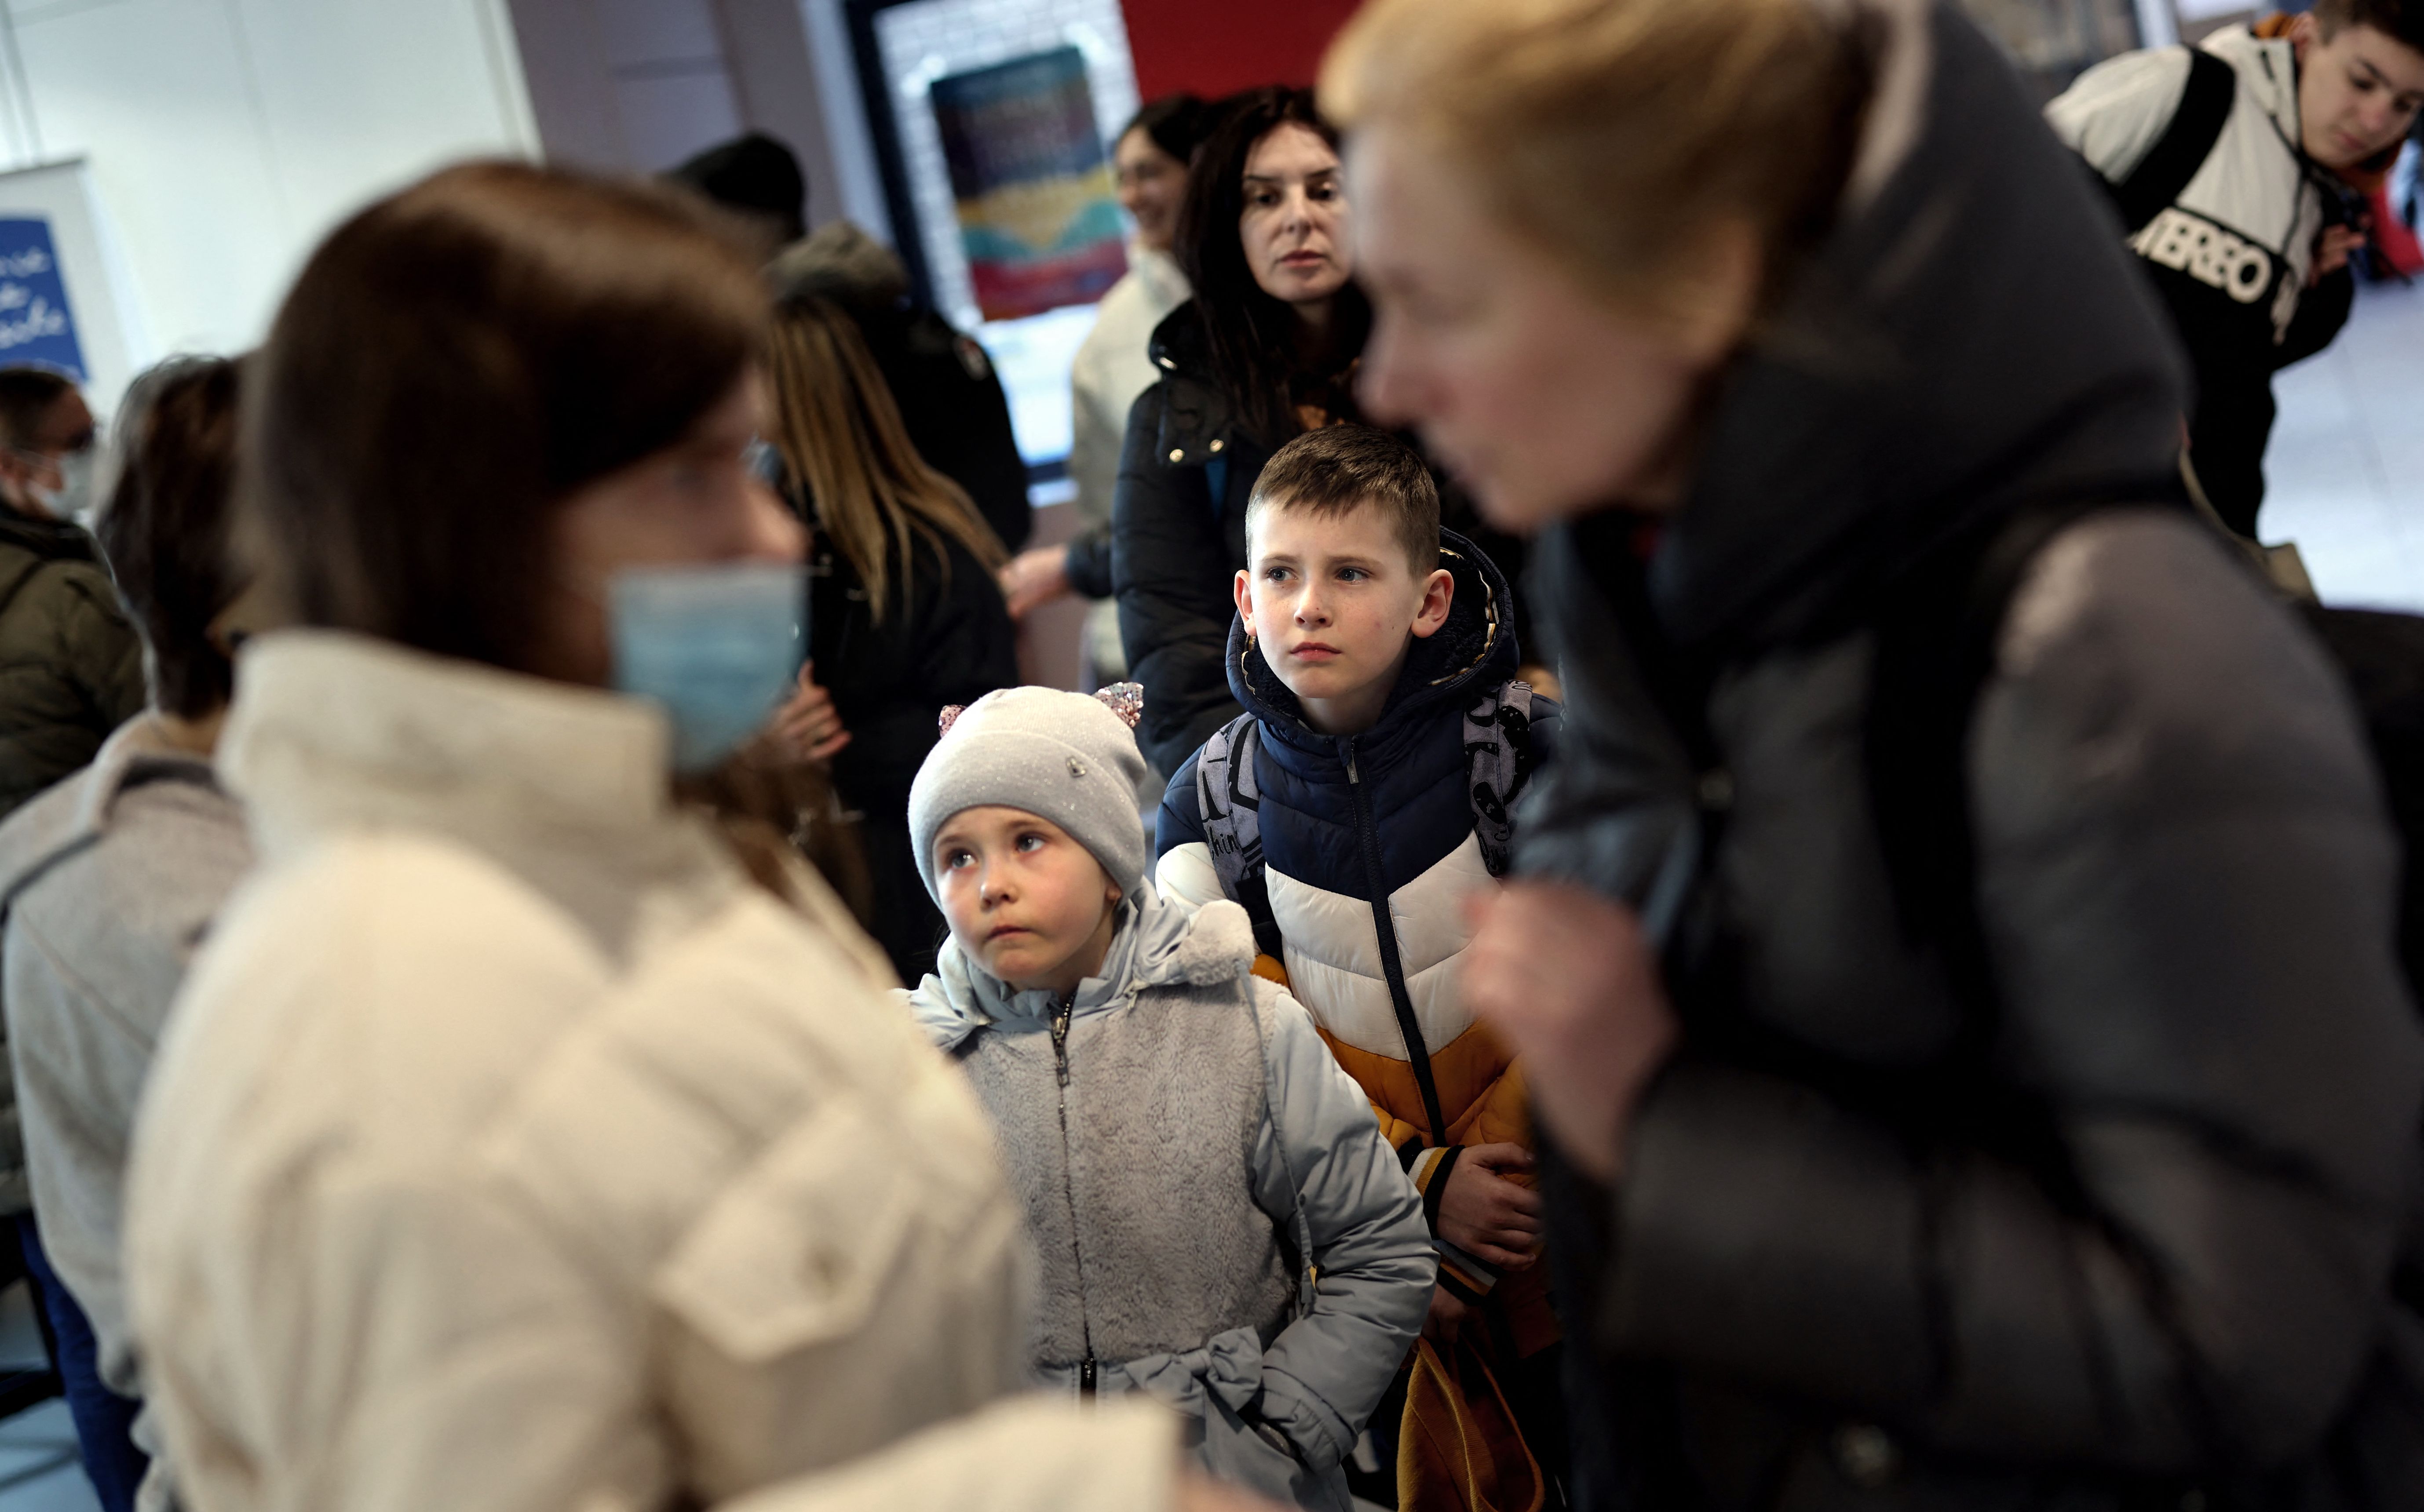 Ukrainian evacuees arrive at a France Terre d'Asile's welcome center for refugees in Paris, France, on March 7.